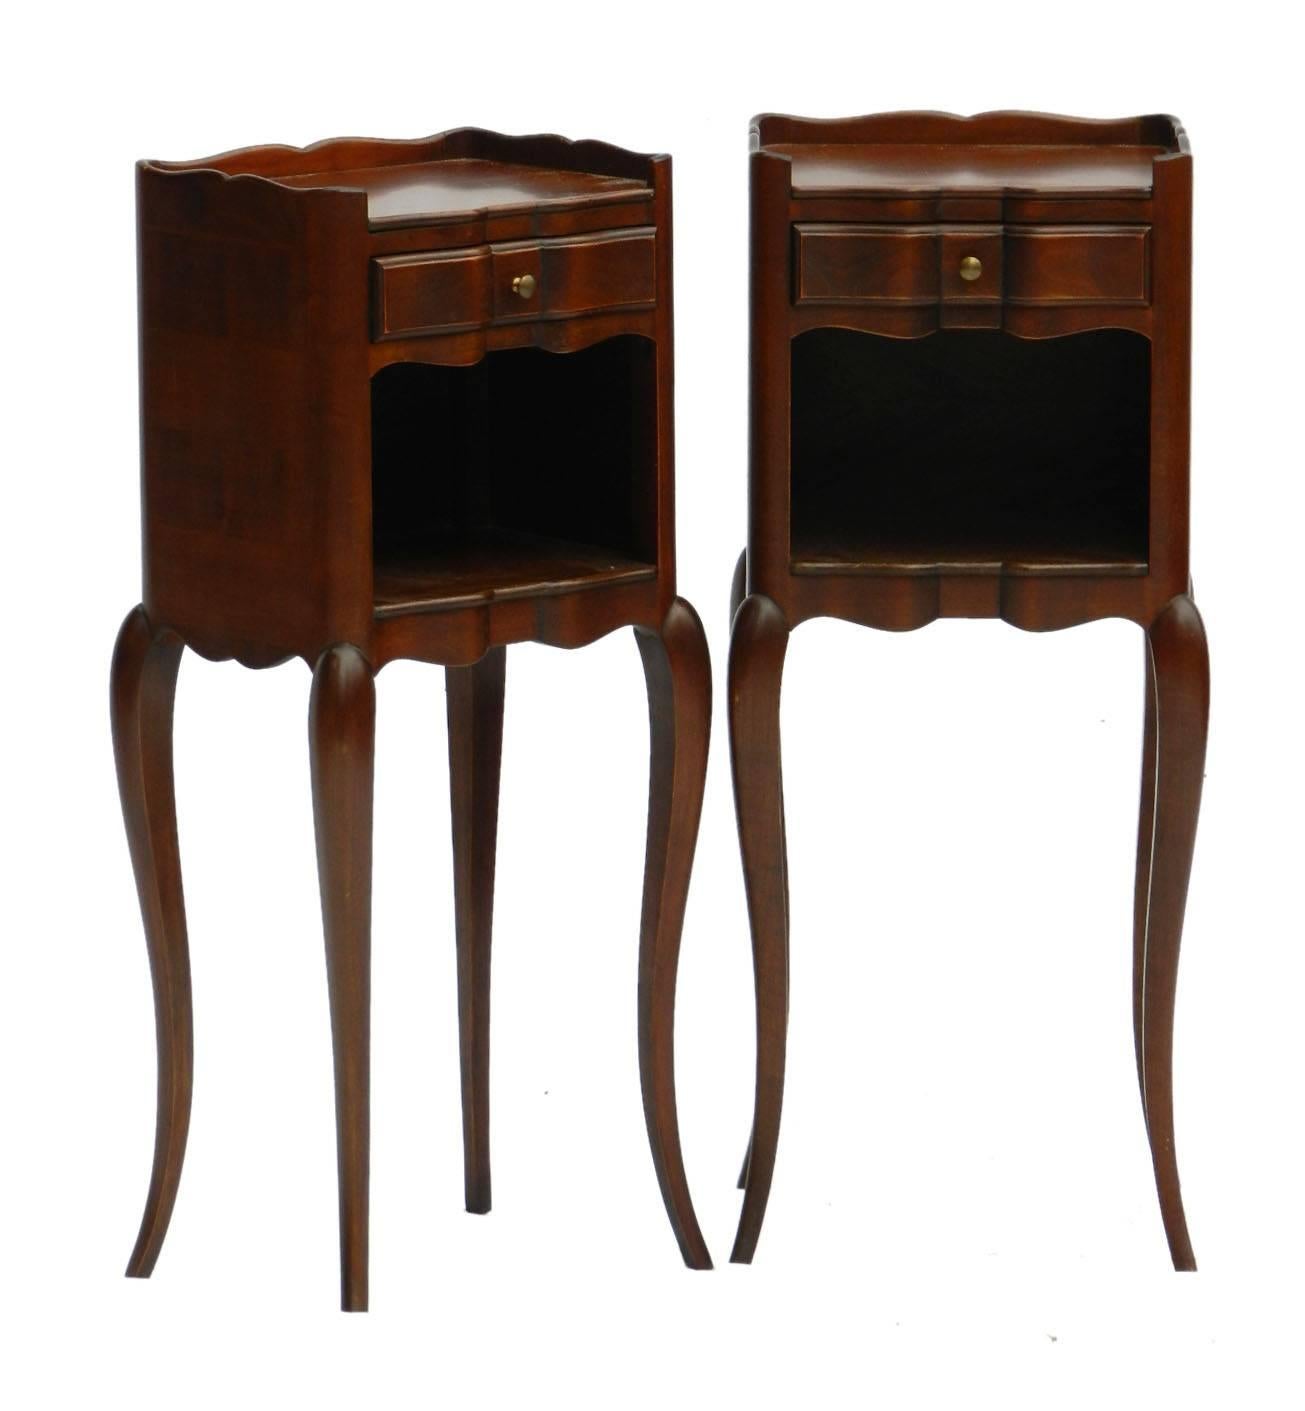 Pair of French diminutive side cabinets bedside tables nightstands.
mid-20th century Louis.
Unusual Breakfront with single drawer.
Dark cherry.
Measures: H: 70 cm (27.6 ins) W: 27 cm (10.6 ins) D: 22 cm (8.7 ins).